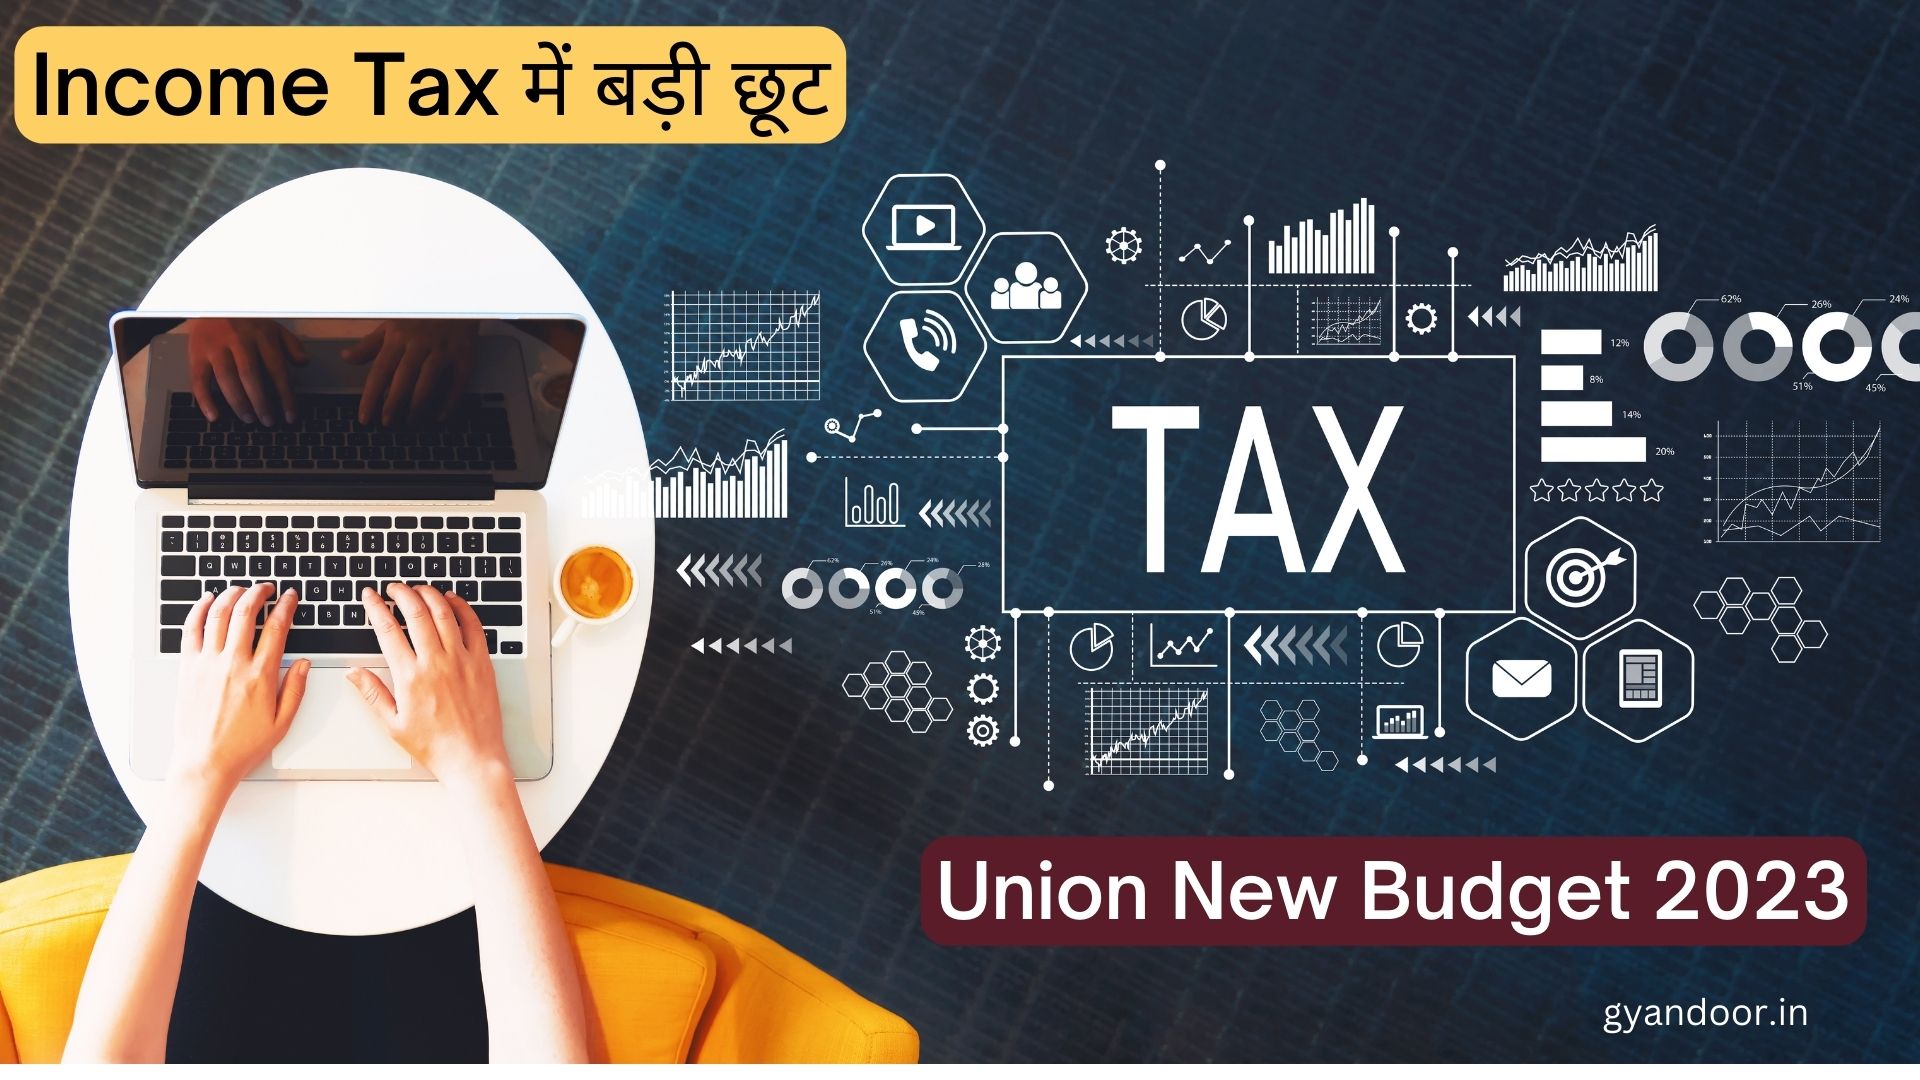 Union New Budget 2023 in Hindi